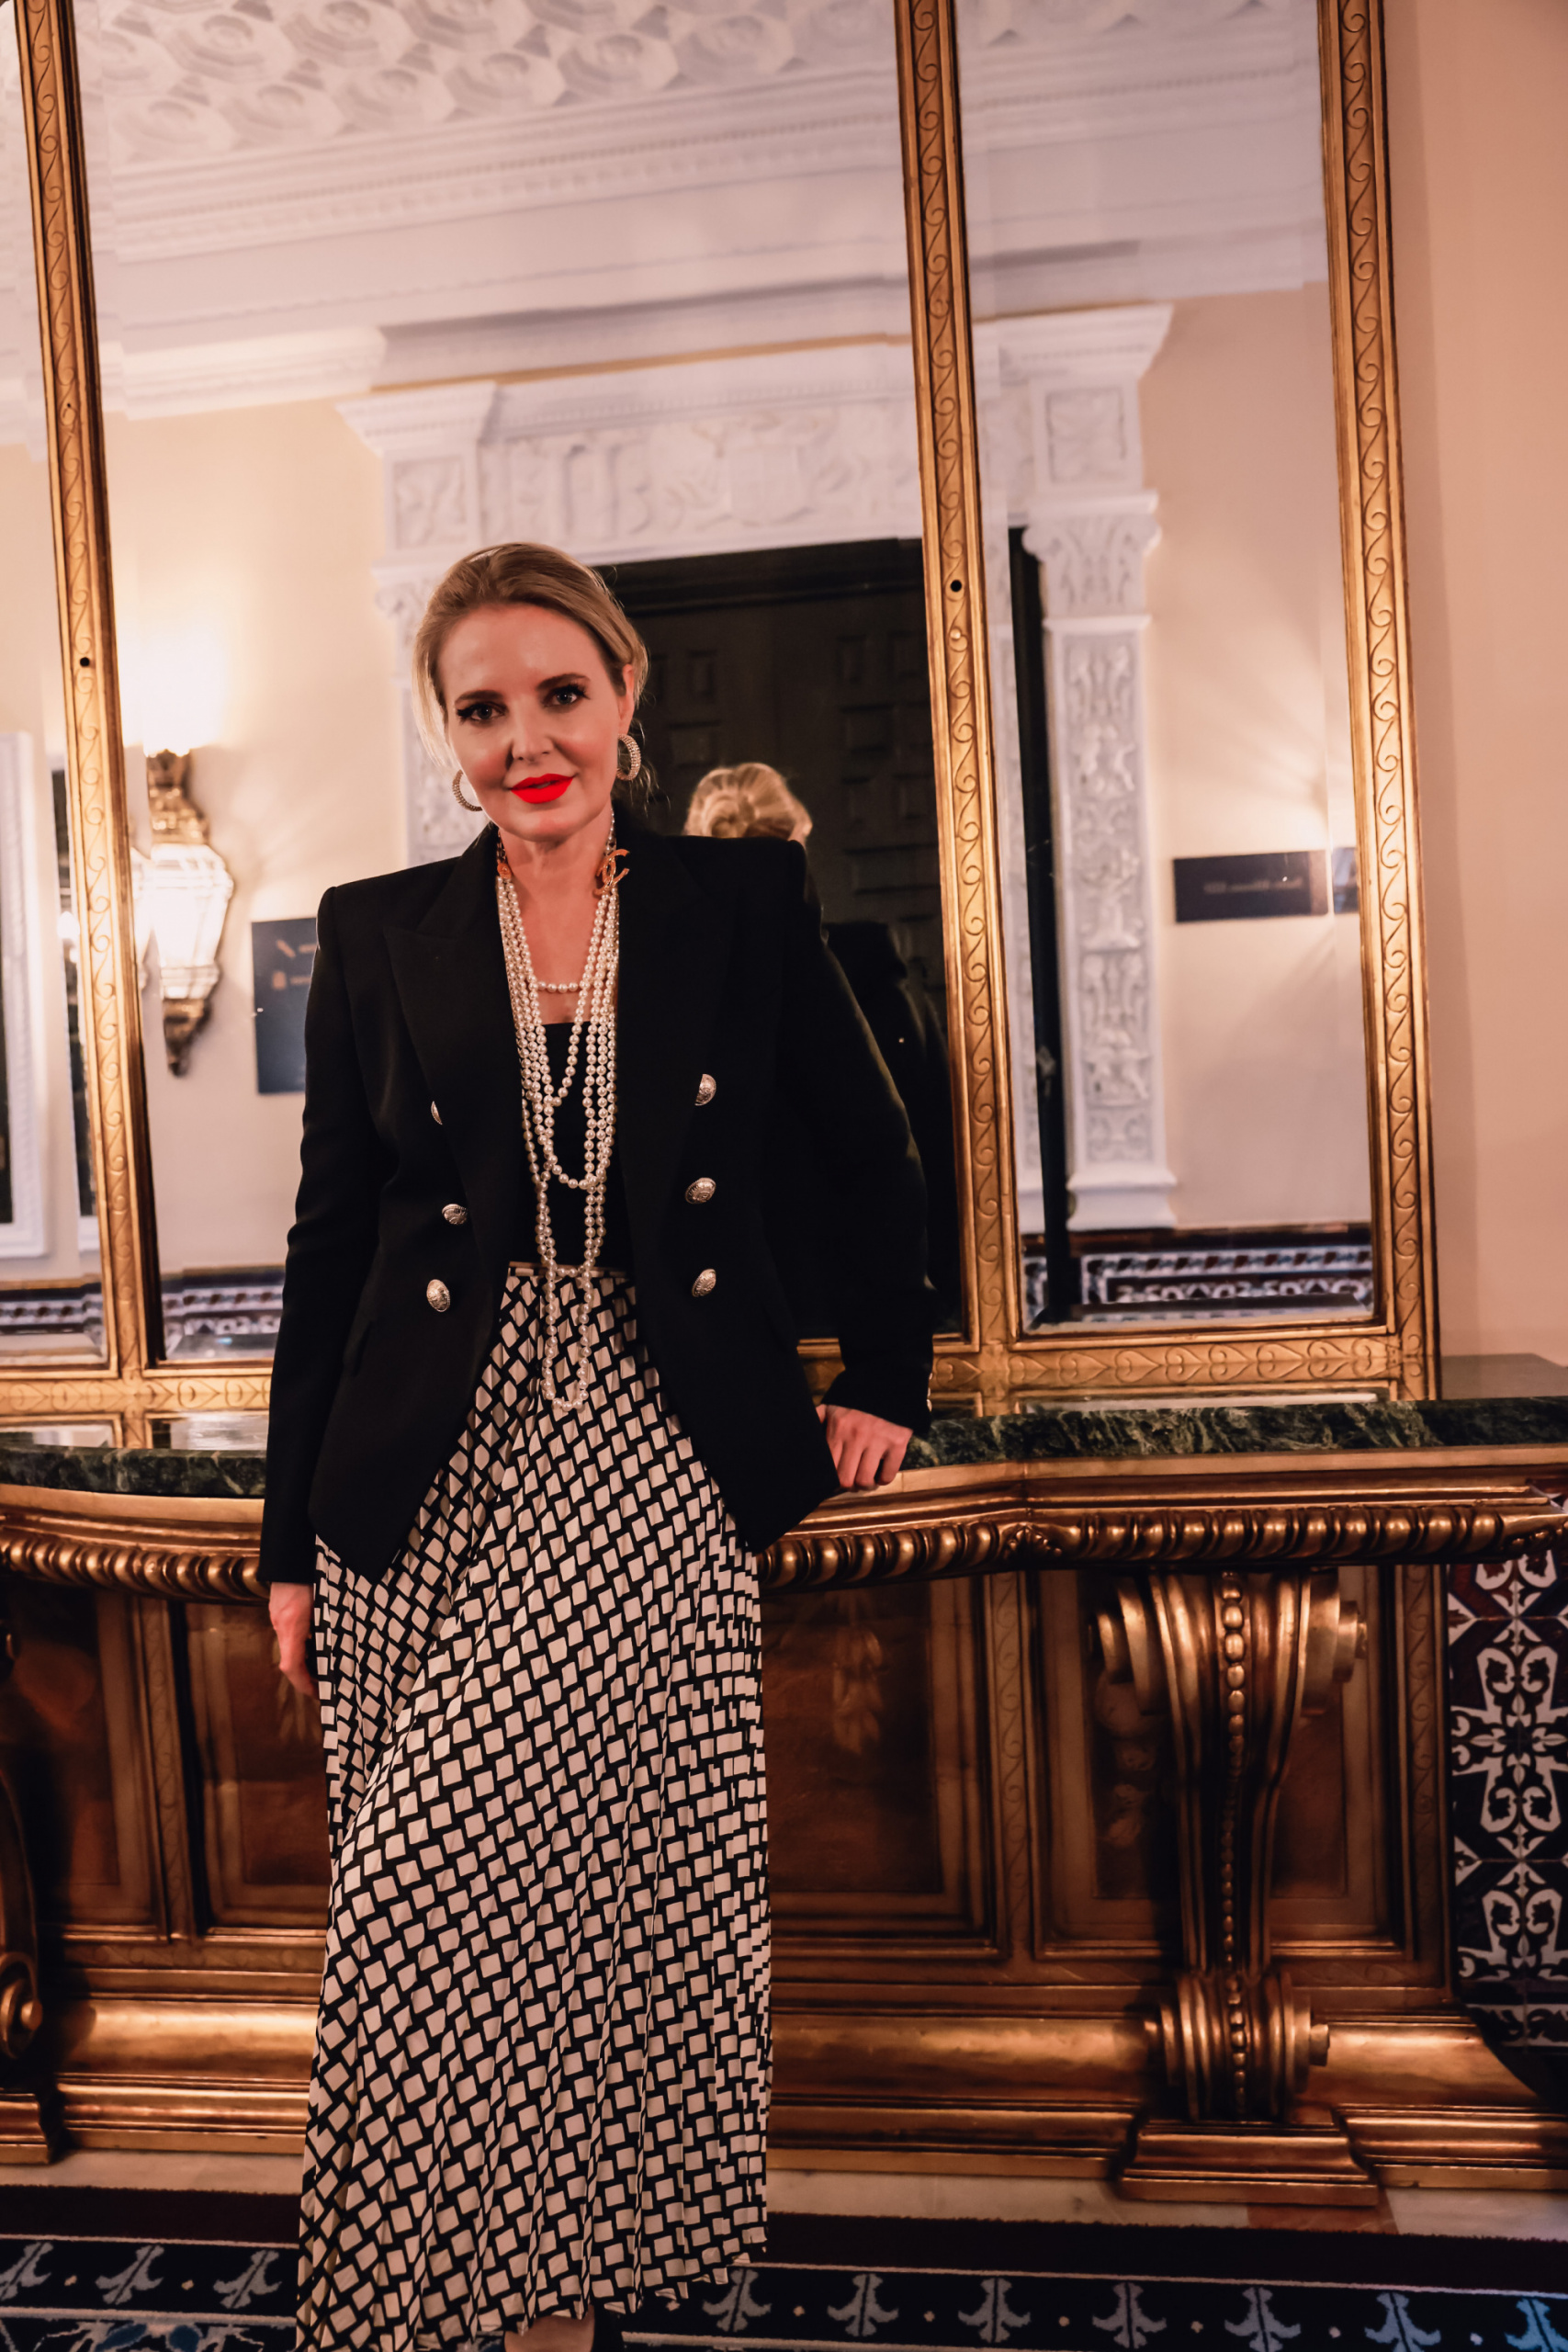 office outfits, stylish office outfits, chic office outfits, office outfits over 40, workwear over 40, stylish workwear, erin busbee, black and white printed mango midi skirt, chanel multi strand necklace, black cami, black pointed toe pumps, sevilla, spain